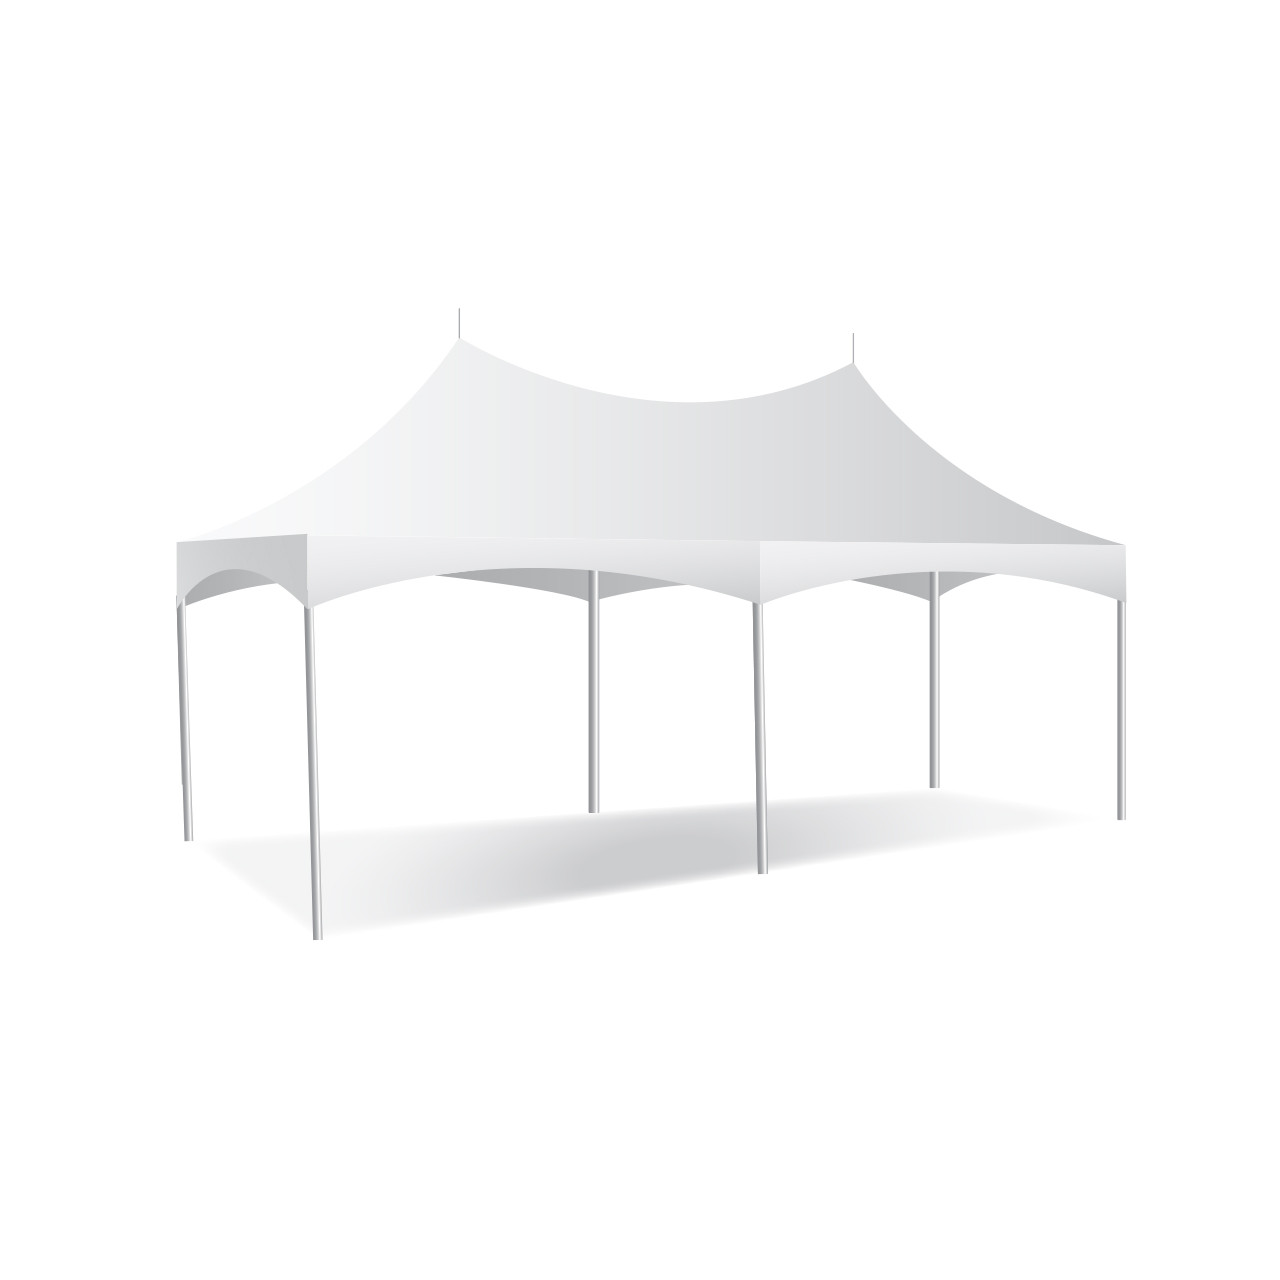 10' x 20' Pinnacle Series, White Cross Cable Tent, Complete.